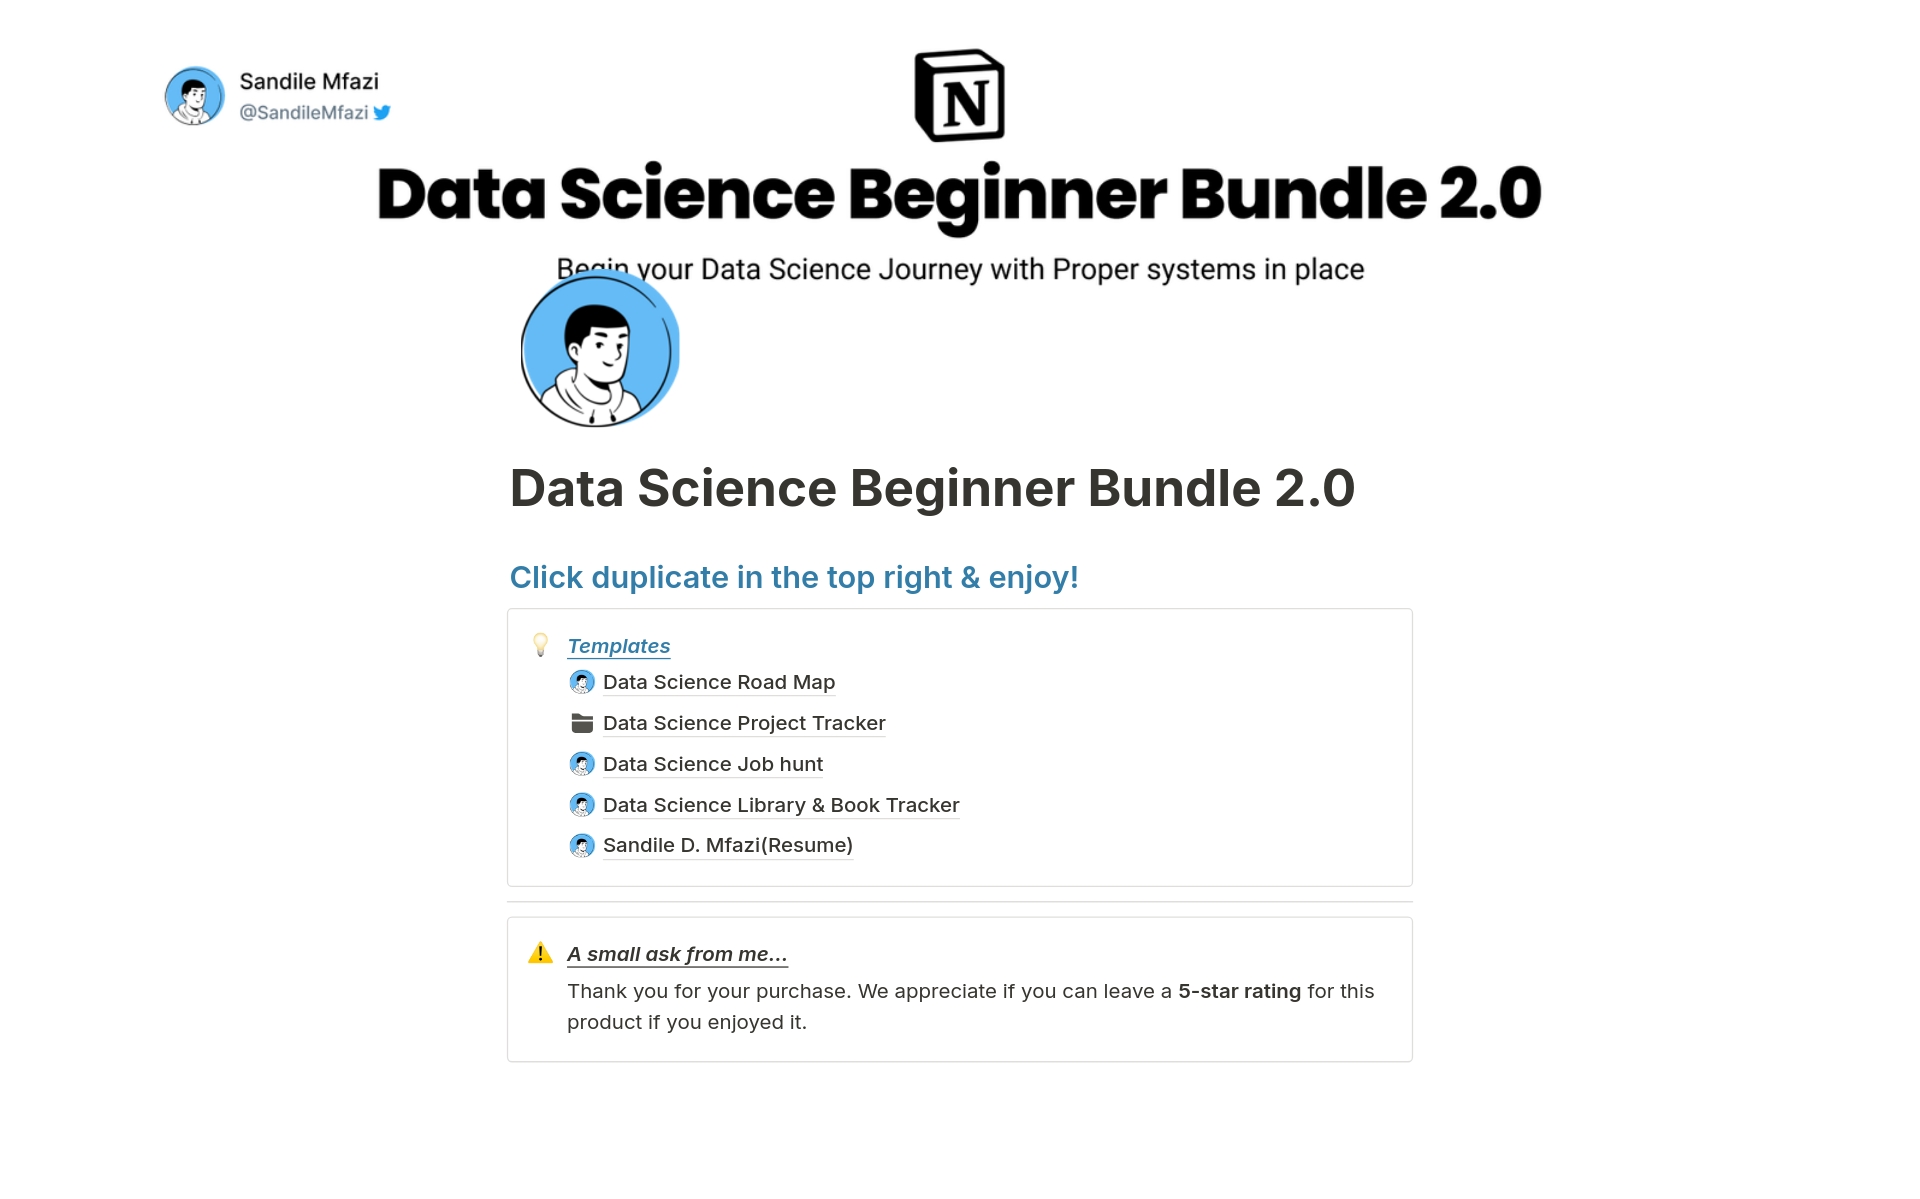 The New Notion Data Science Beginner Bundle is a bundle of not 4 but 5 starter templates for Notion Users & Data Science Enthusiasts to help anyone in Data Science get started building their own workspace in Notion